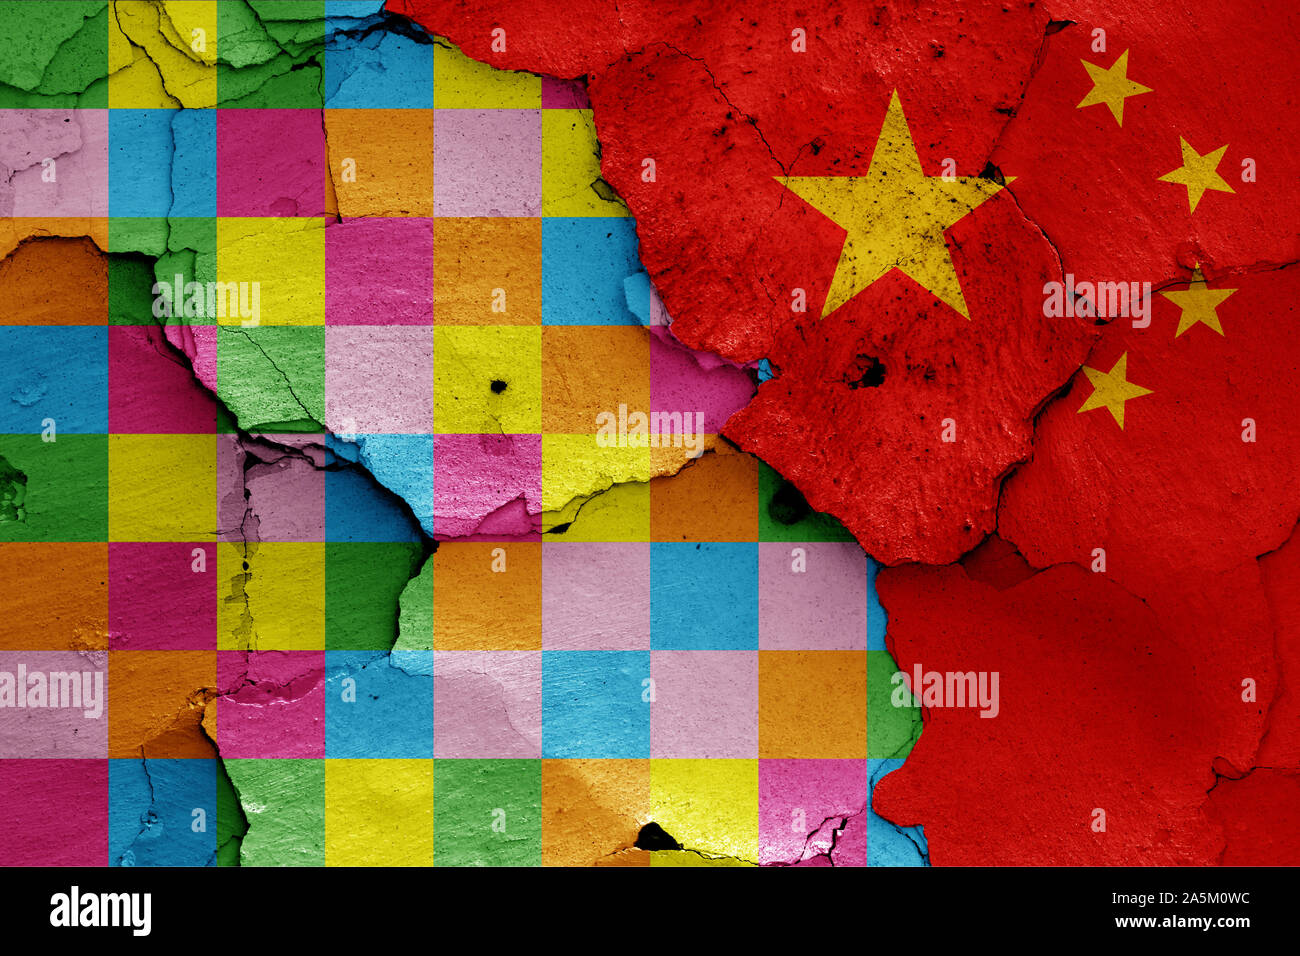 depiction of Lennon wall flag and China painted on cracked wall Stock Photo